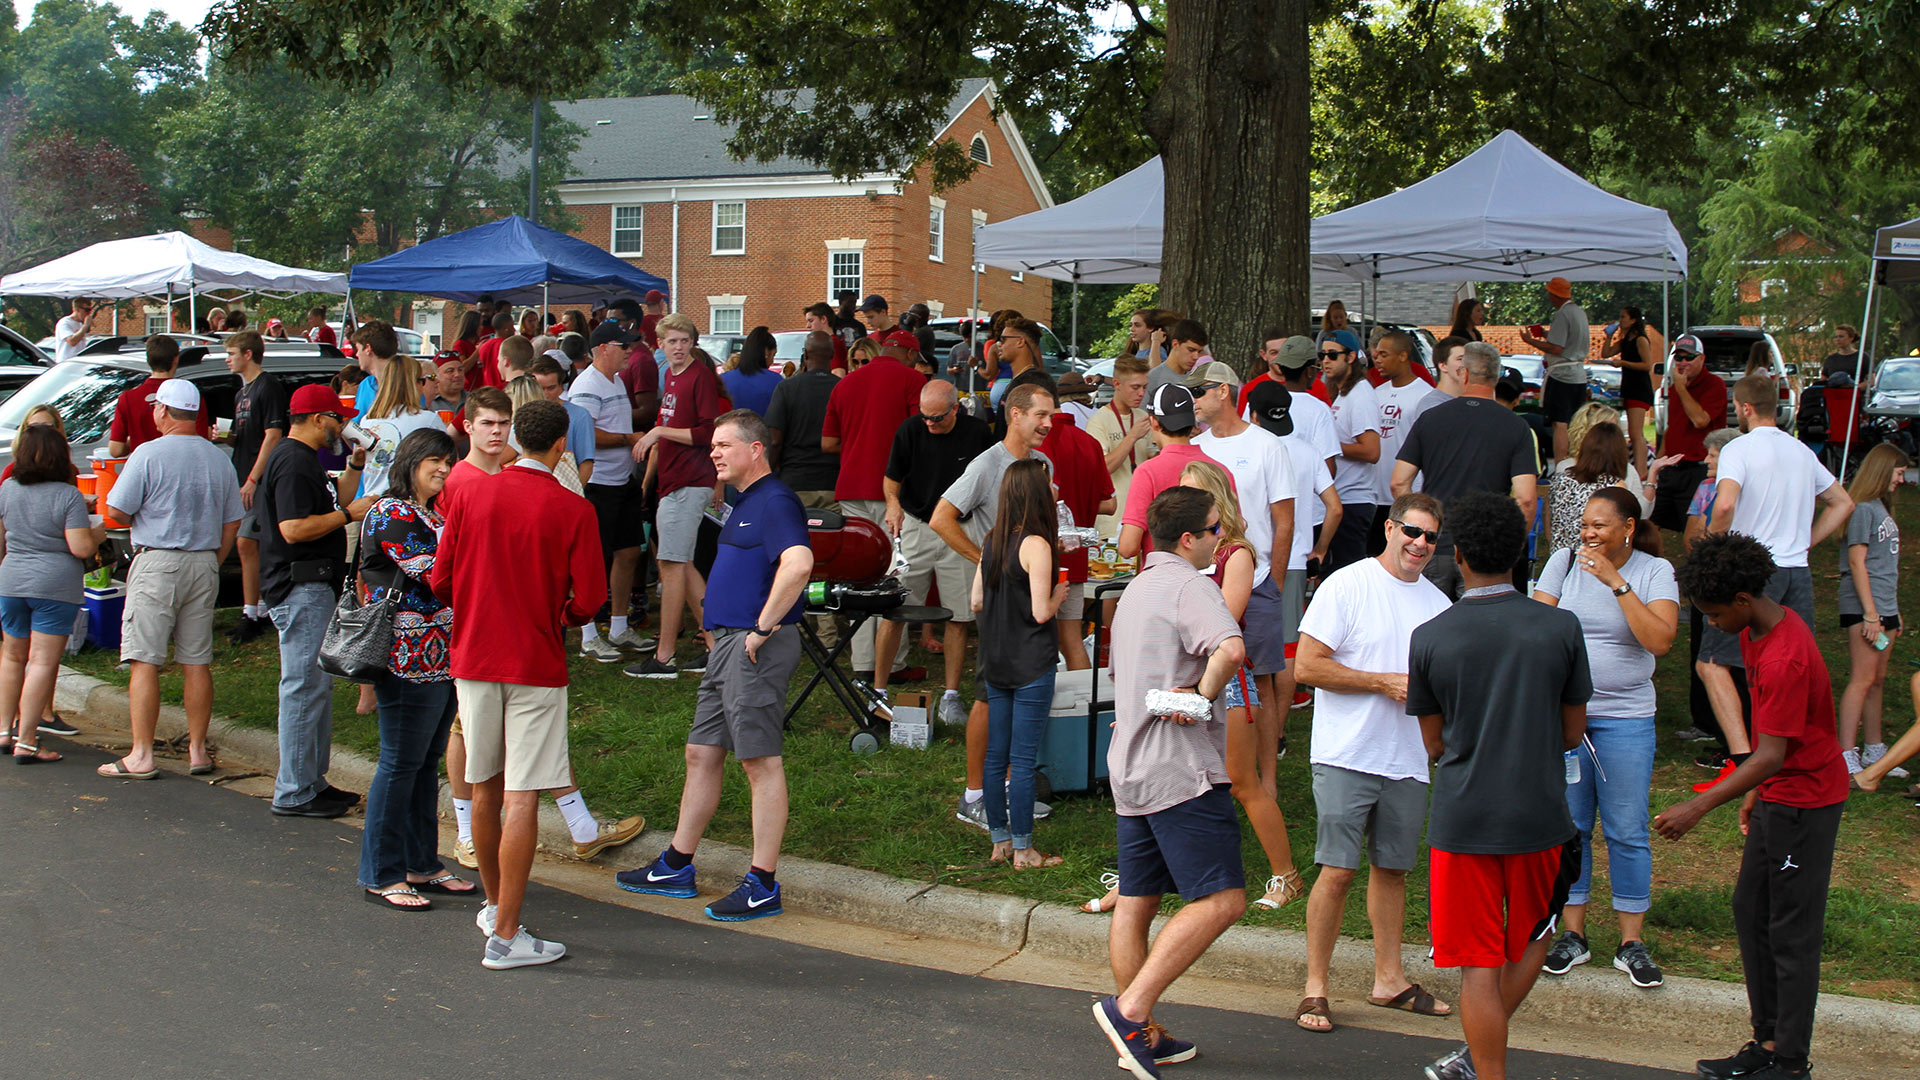 The lawn near the football stadium is packed with tailgaters at Homecoming.